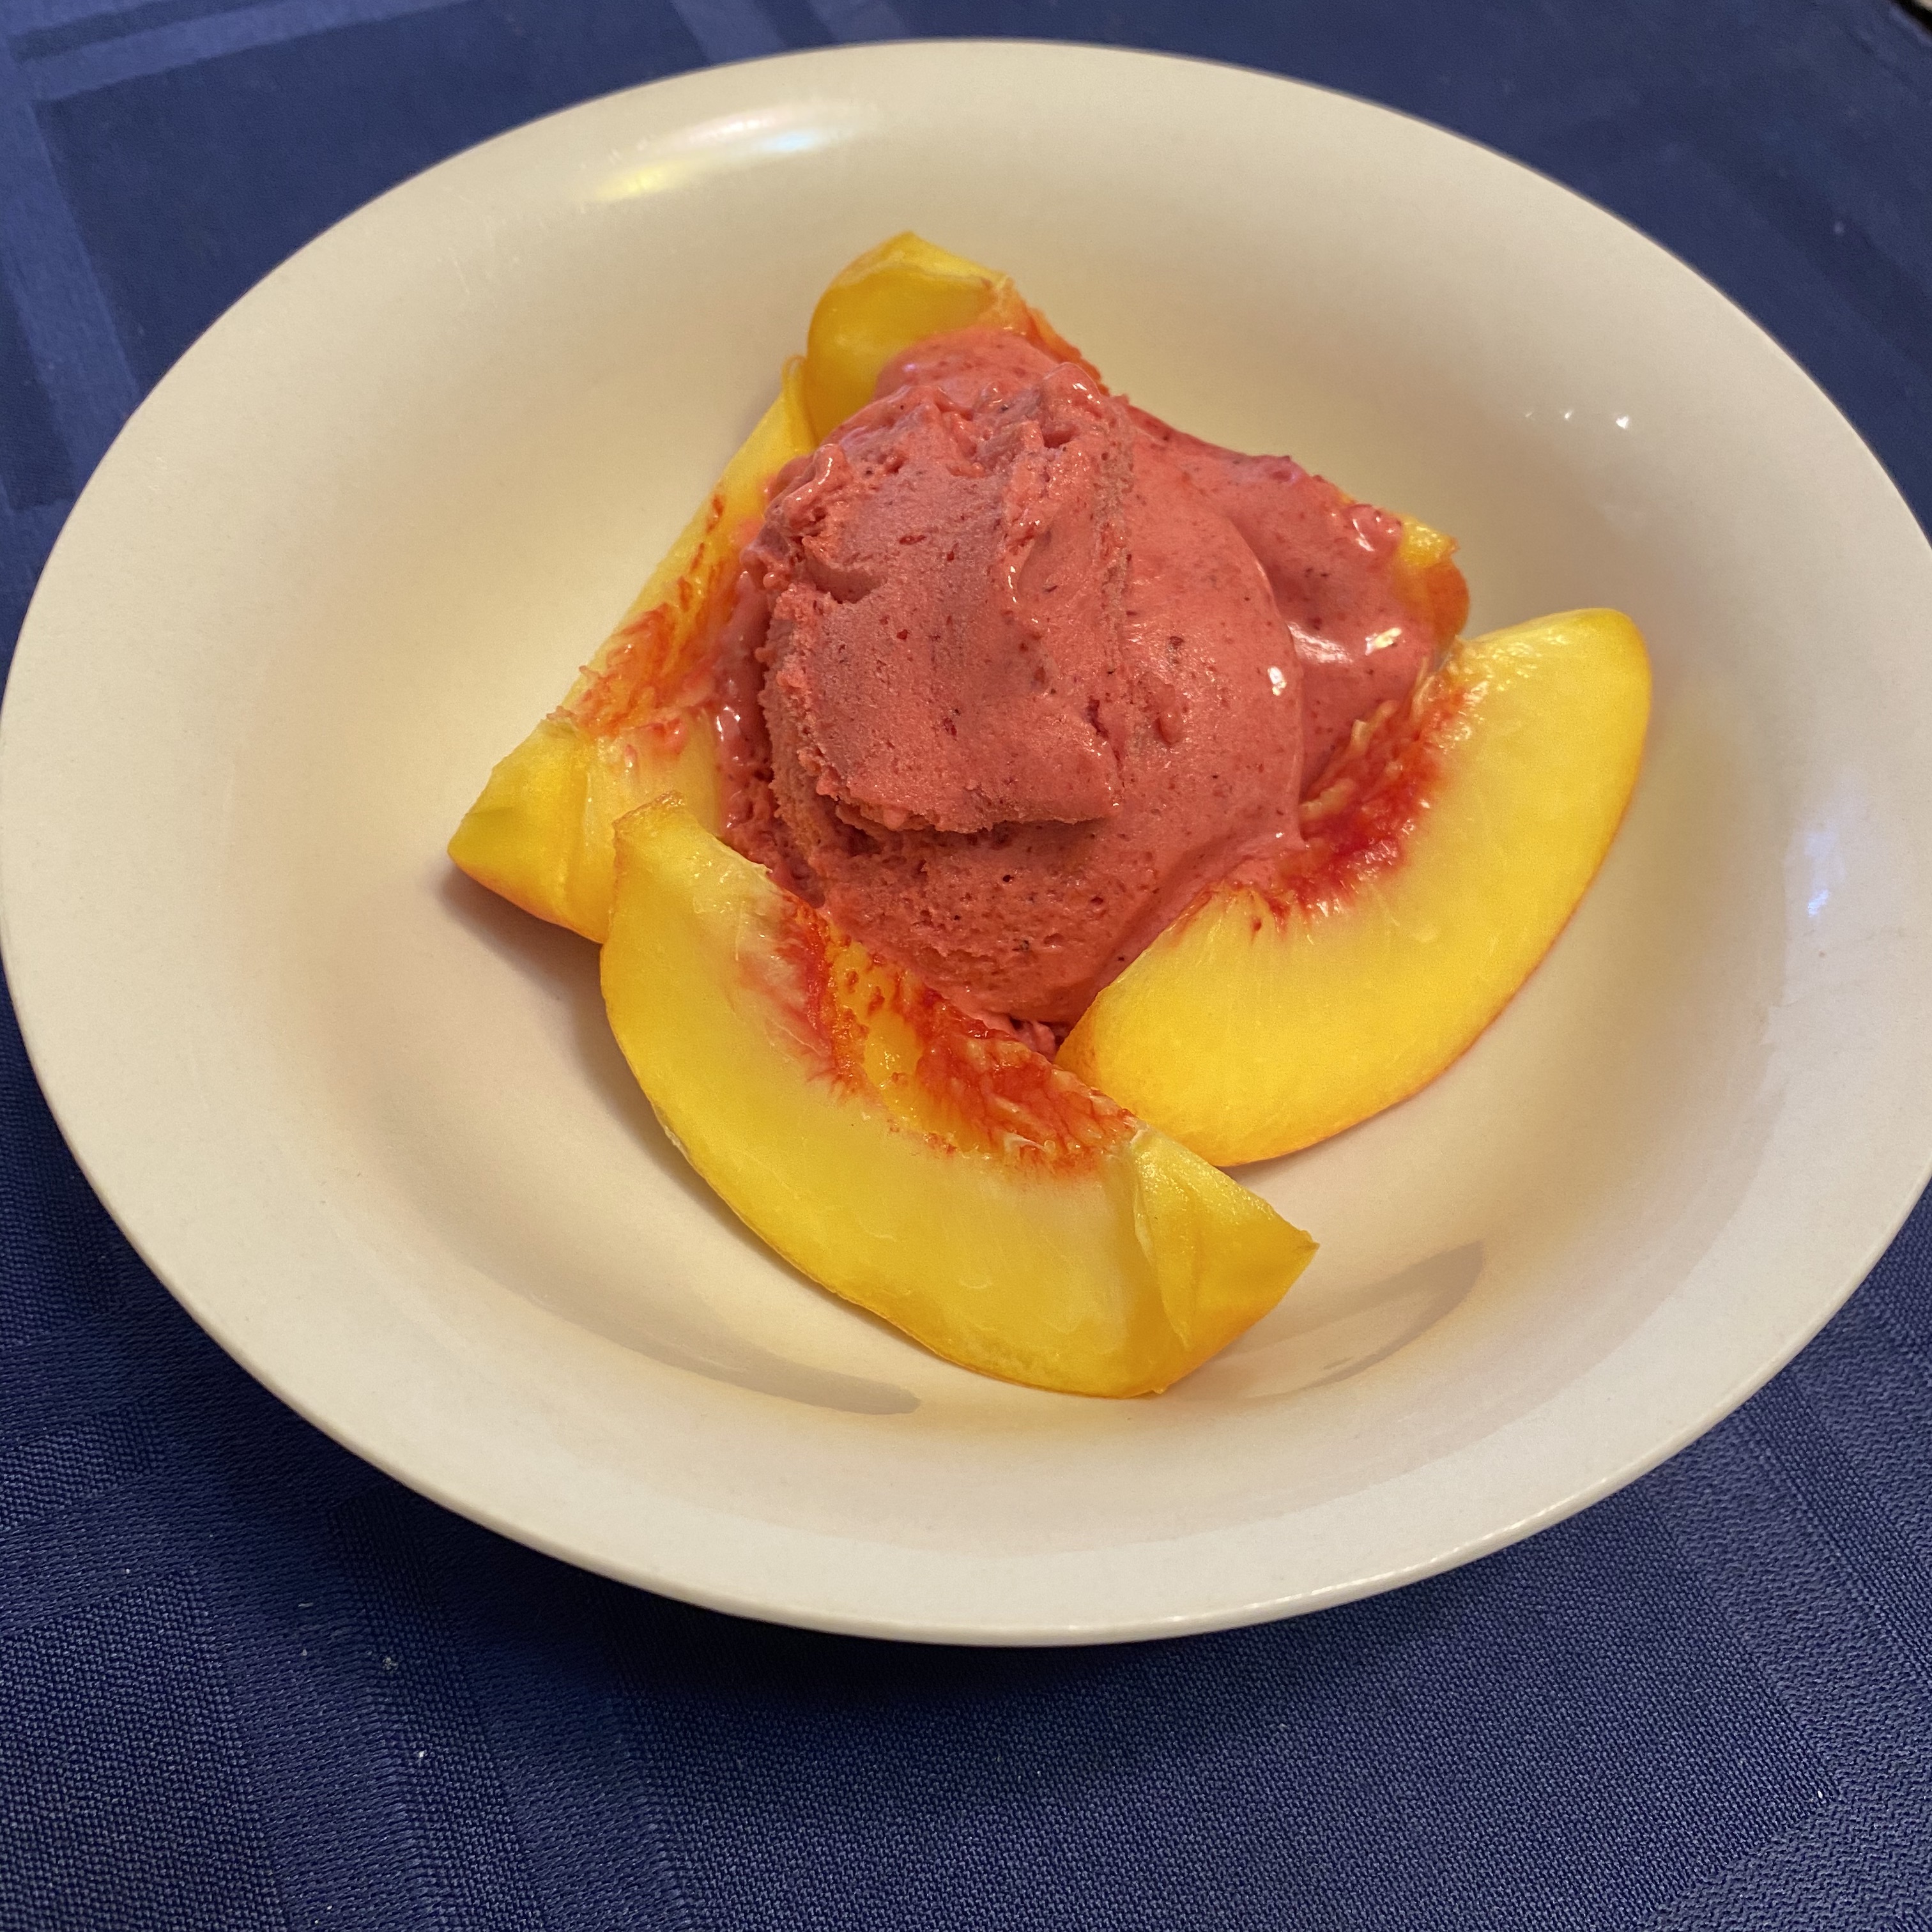 Gluten and dairy-free Raspberry Ginger Lime Gelato paired with fresh peaches - a refreshing and indulgent treat.